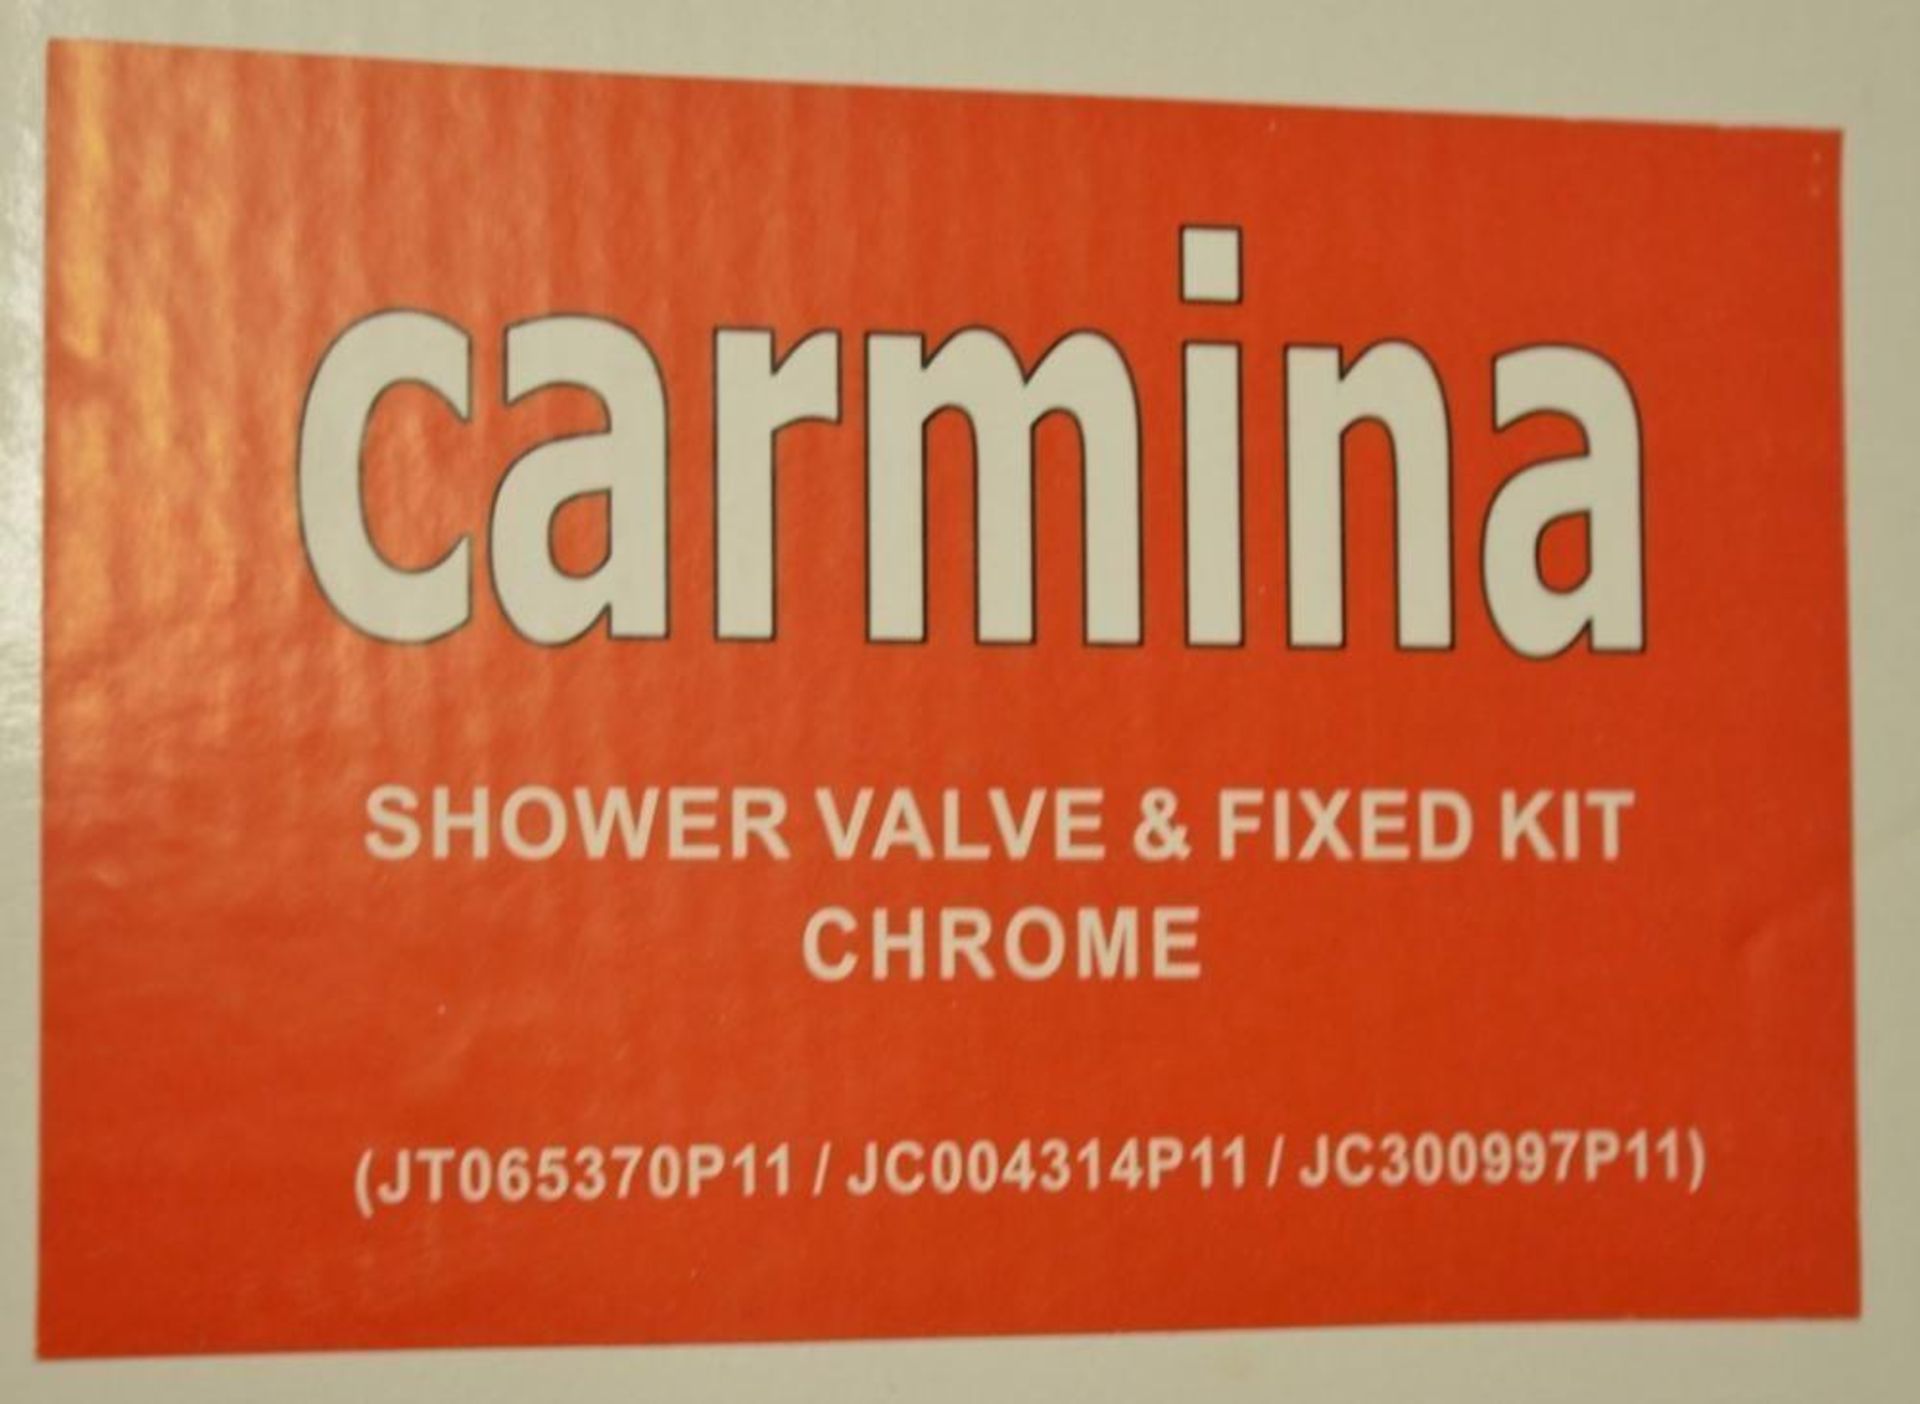 1 x Carmina Shower Valve Kit - Contains Chrome Shower Head, Fixed Arm and Manual Control - Brass Con - Image 2 of 10